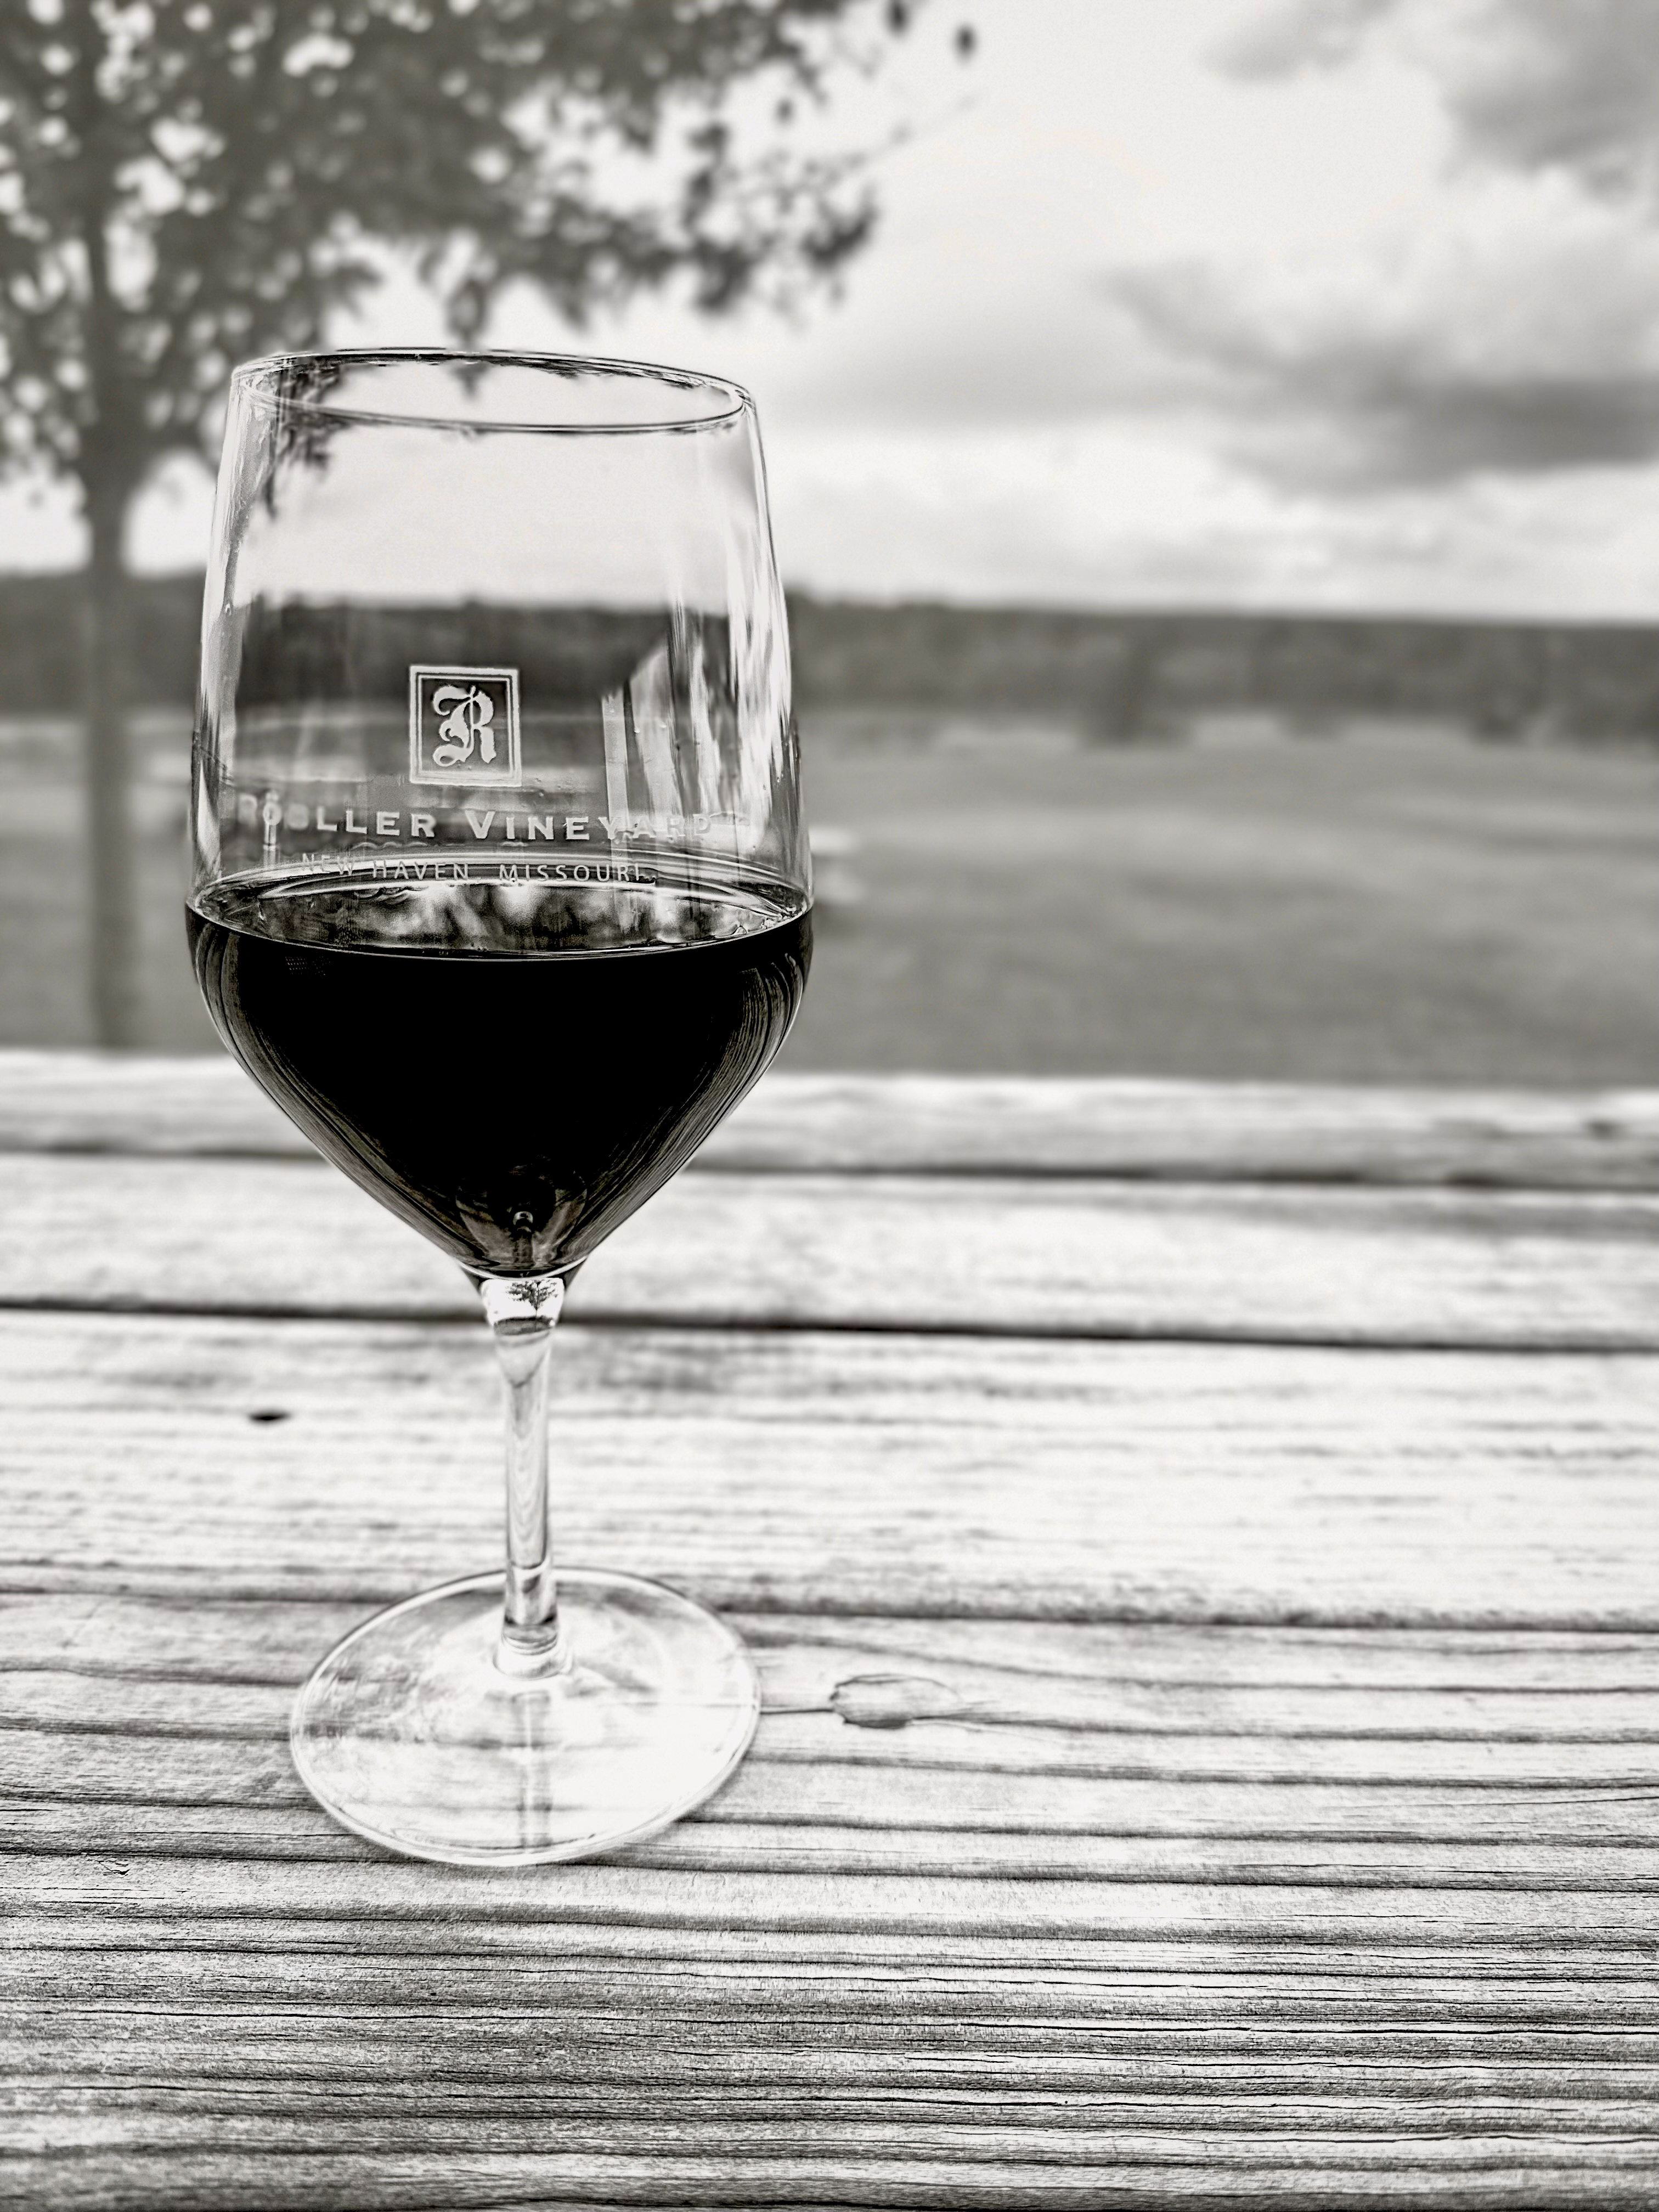 Black and White photo of a wine glass